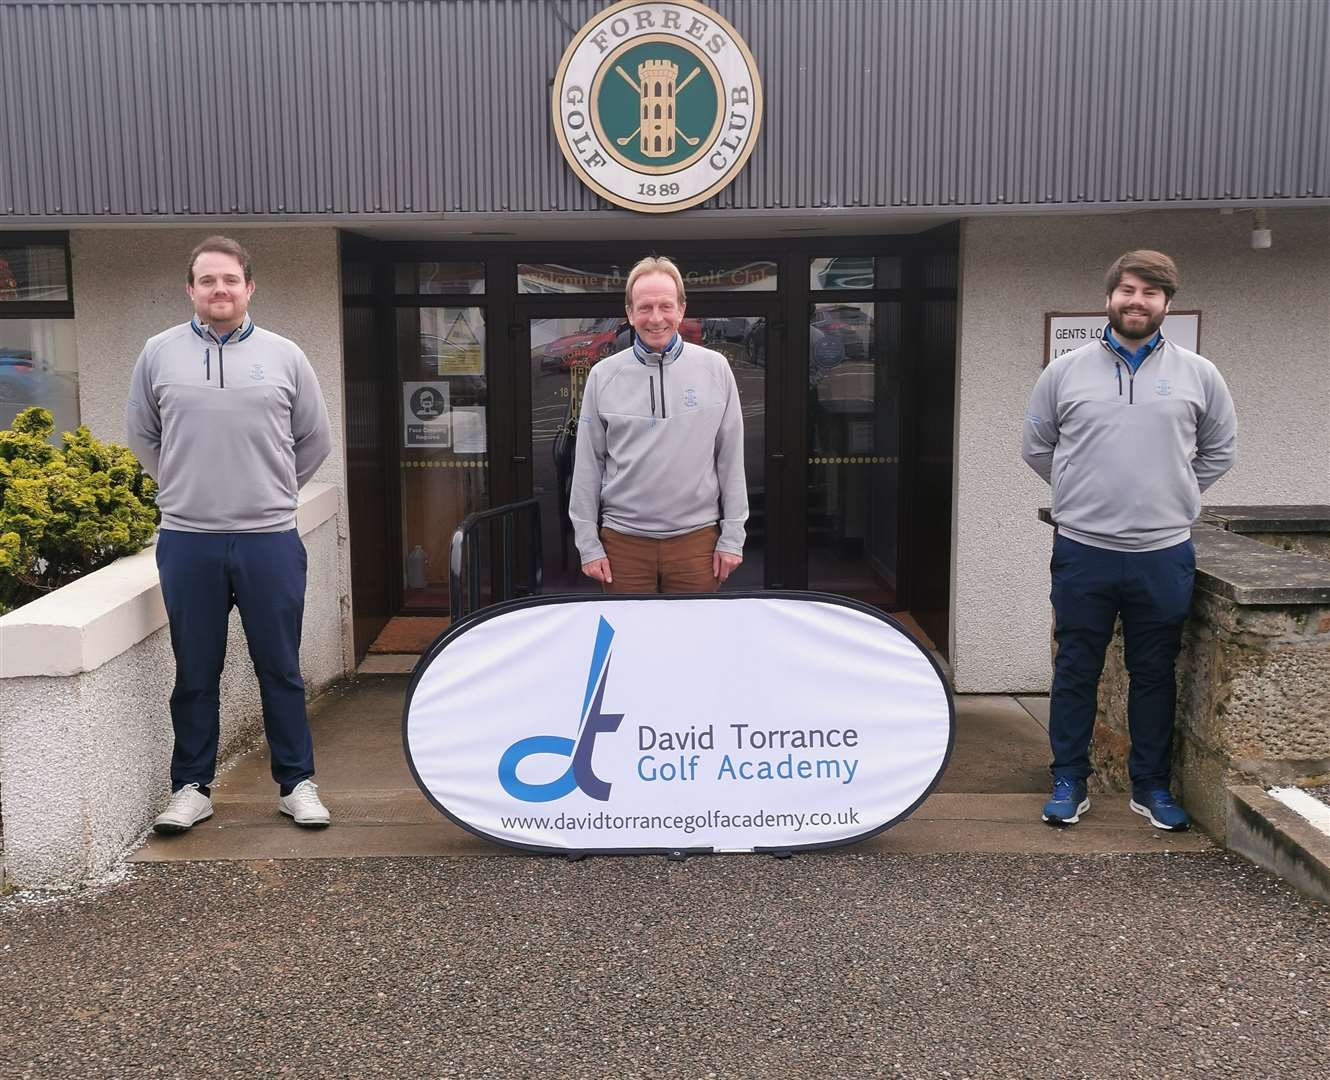 From left to right: Sean Blacklaw, general manager, David Torrance, specialist PGA coach and Hector Clarke, golf operations assistant.